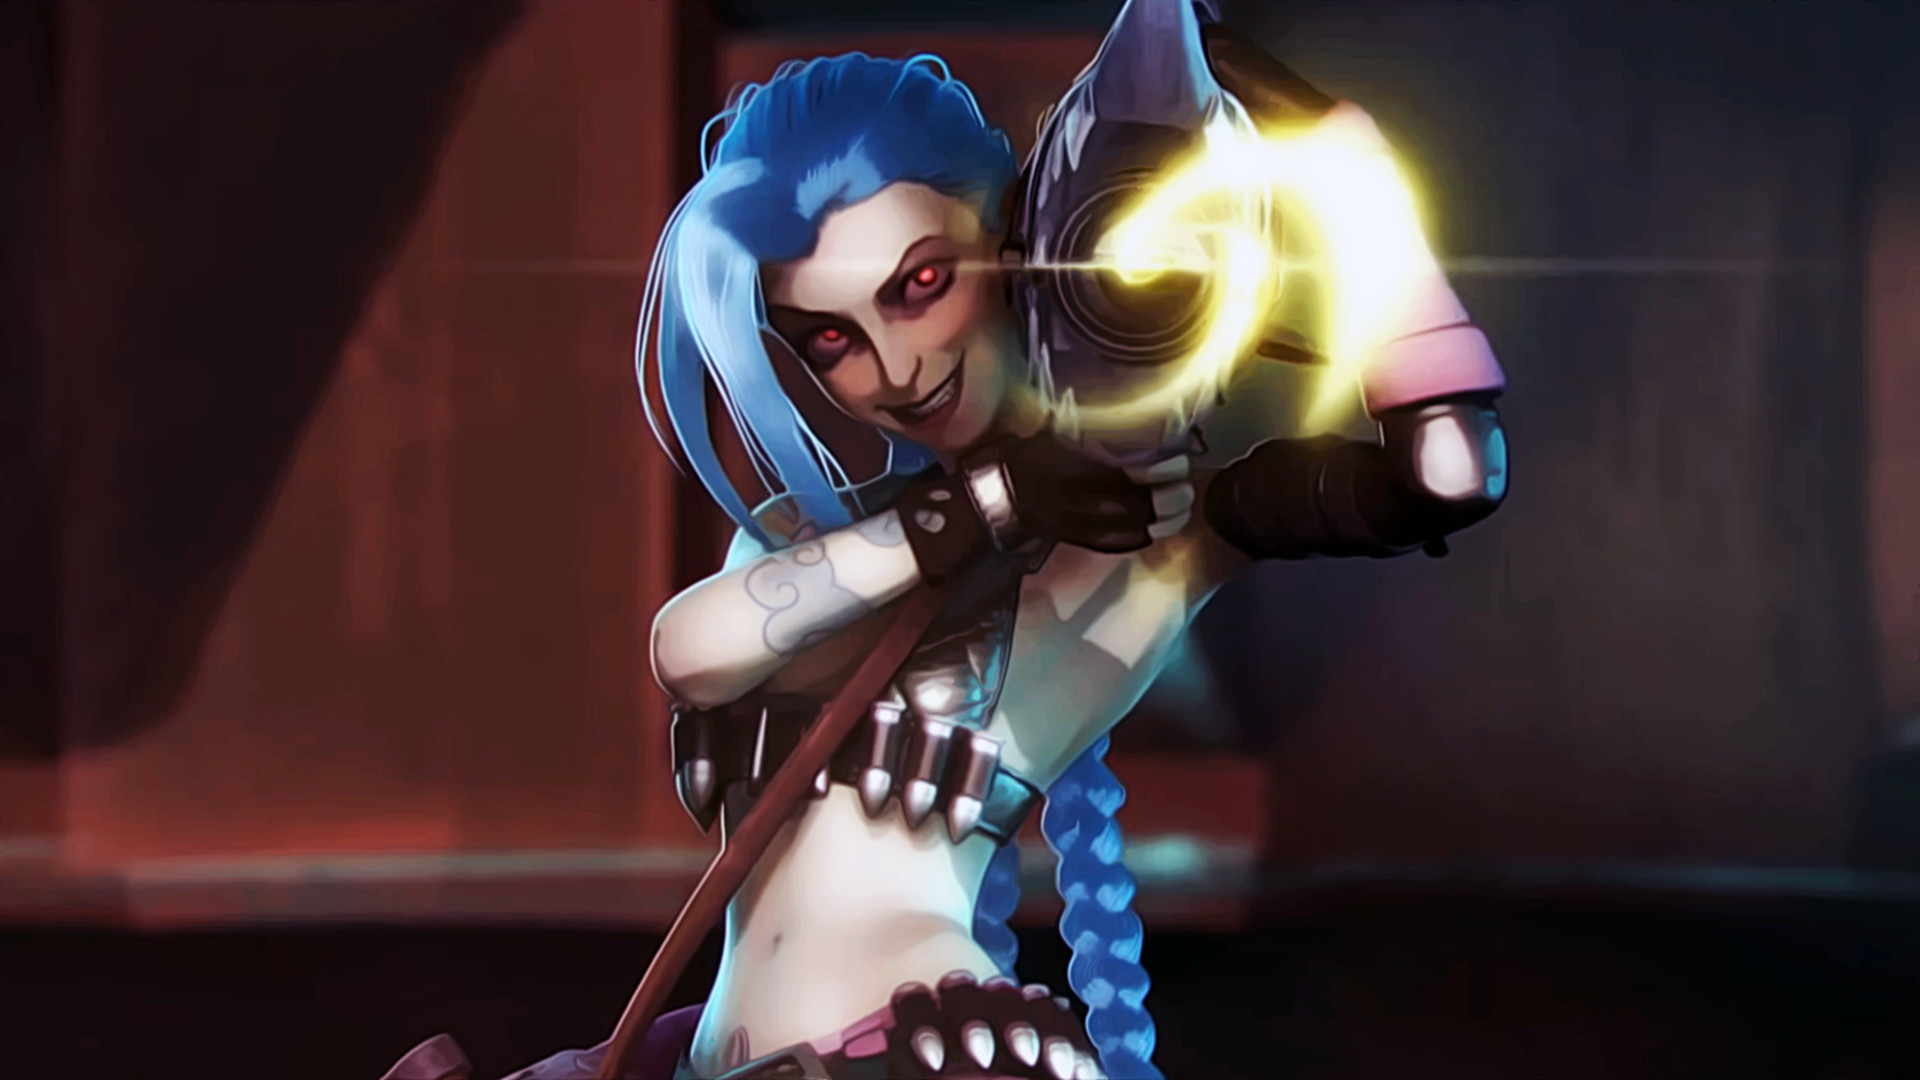 1920x1080 ... HD Jinx Wallpapers For Desktop, Laptop and Mobiles. Here You Can  Download More than 5 Million Photography collections Uploaded By Users.